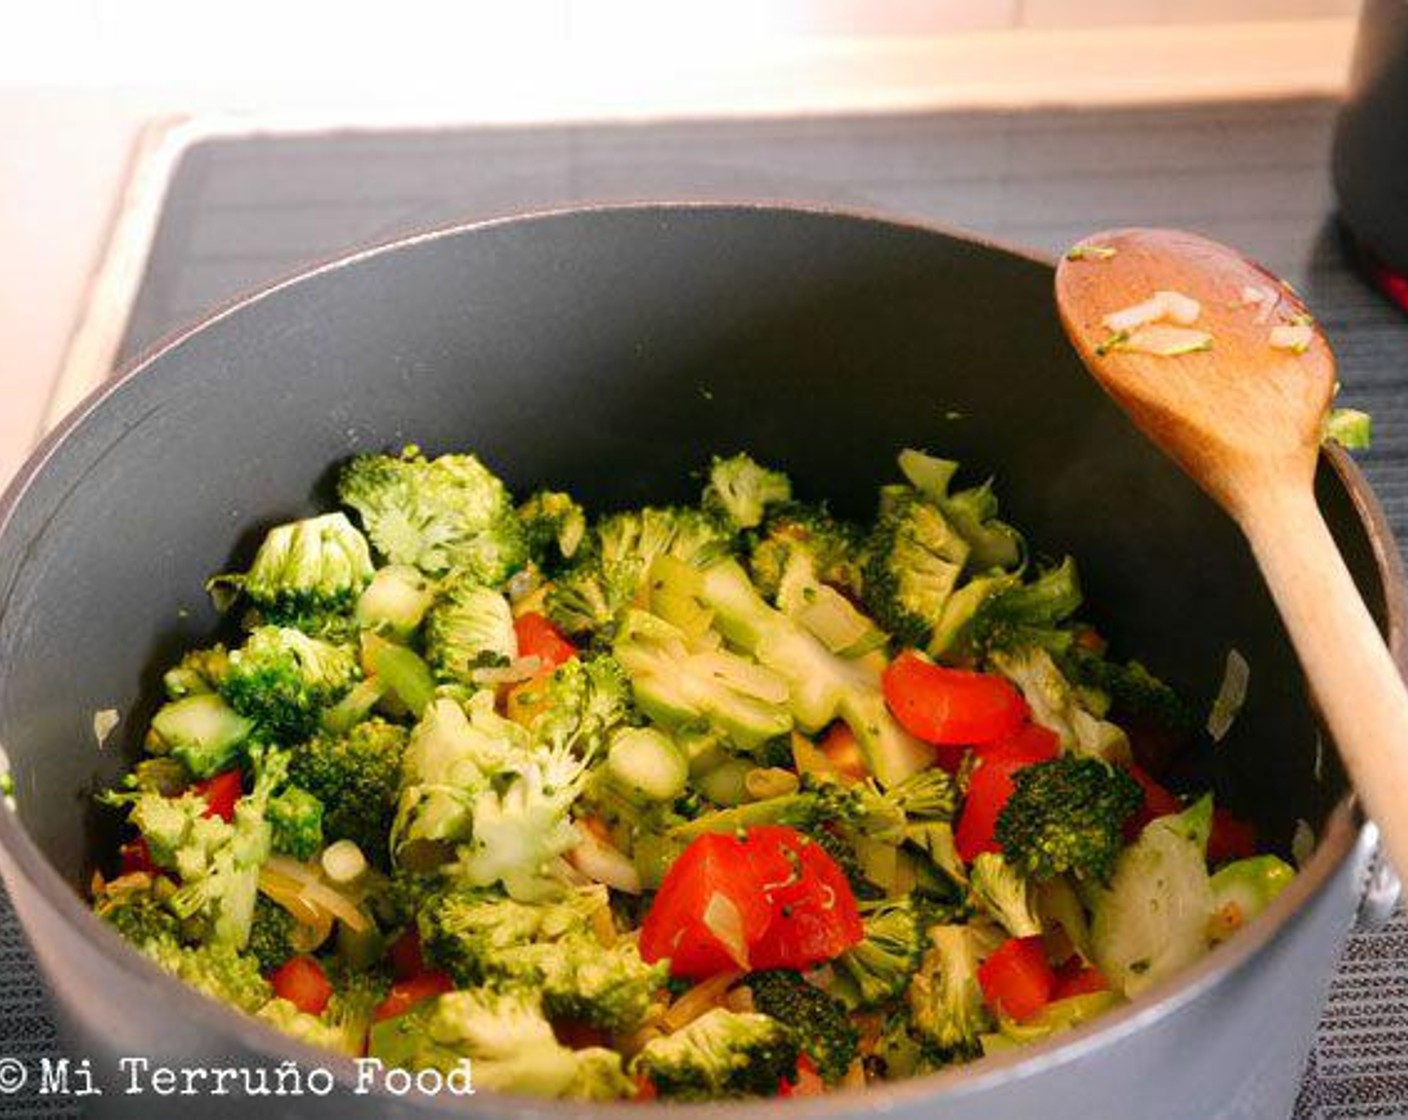 step 6 Add the broccoli florets, tomato, and add between 1 1/2 to 2 cups of water. You can take pasta water or fresh water and add cheese.